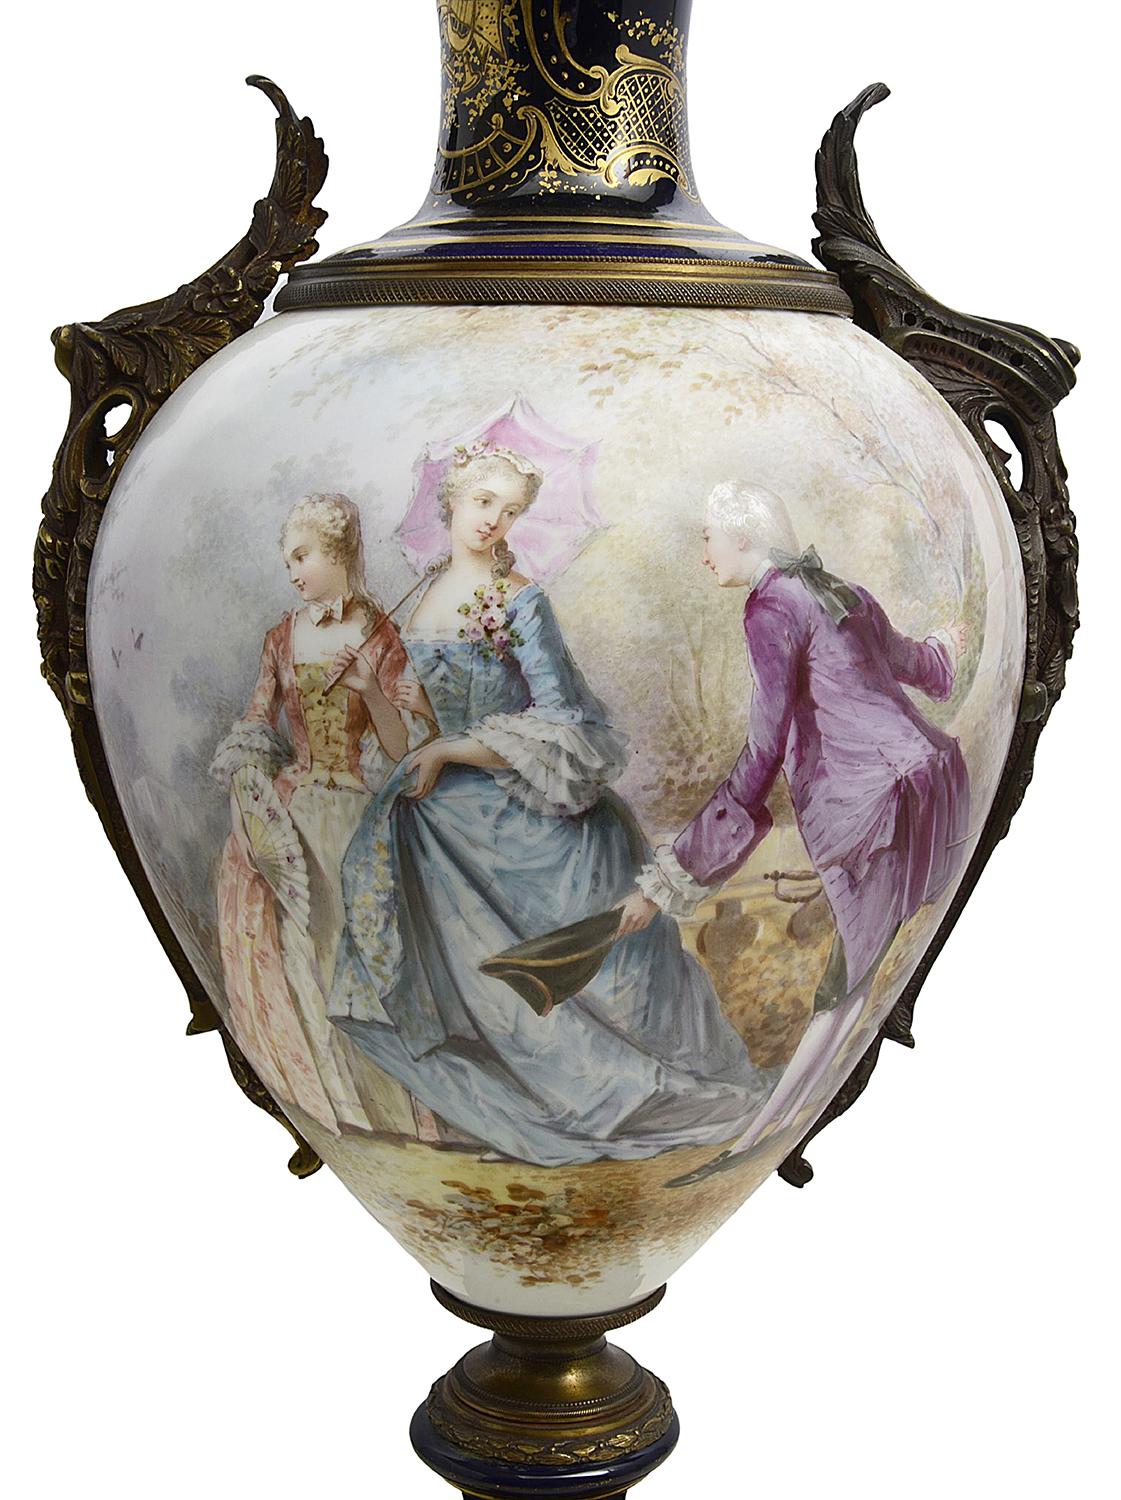 A good quality French Sevres style hand painted porcelain lidded vase, with gilded ormolu scrolling foliate mounts, cobalt blue ground with scrolling gilded decoration, the central scene depicting a courting couple with a chaperon.